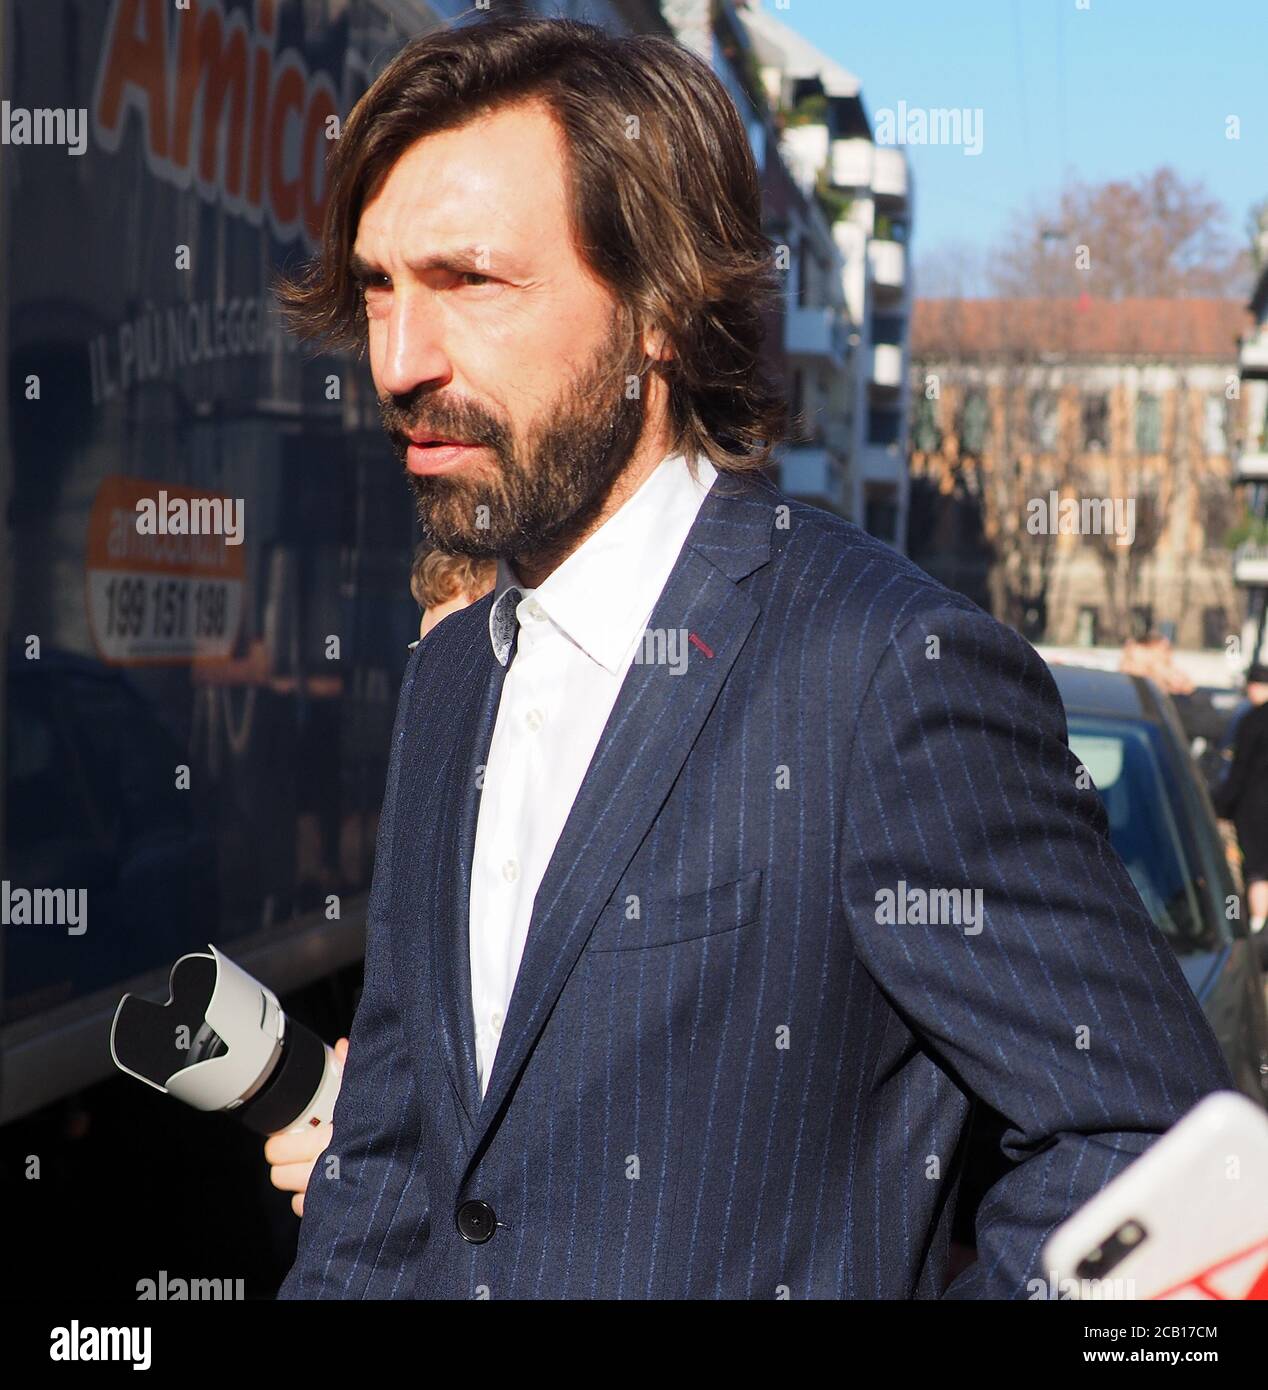 Pirlo High Resolution Stock Photography And Images Alamy